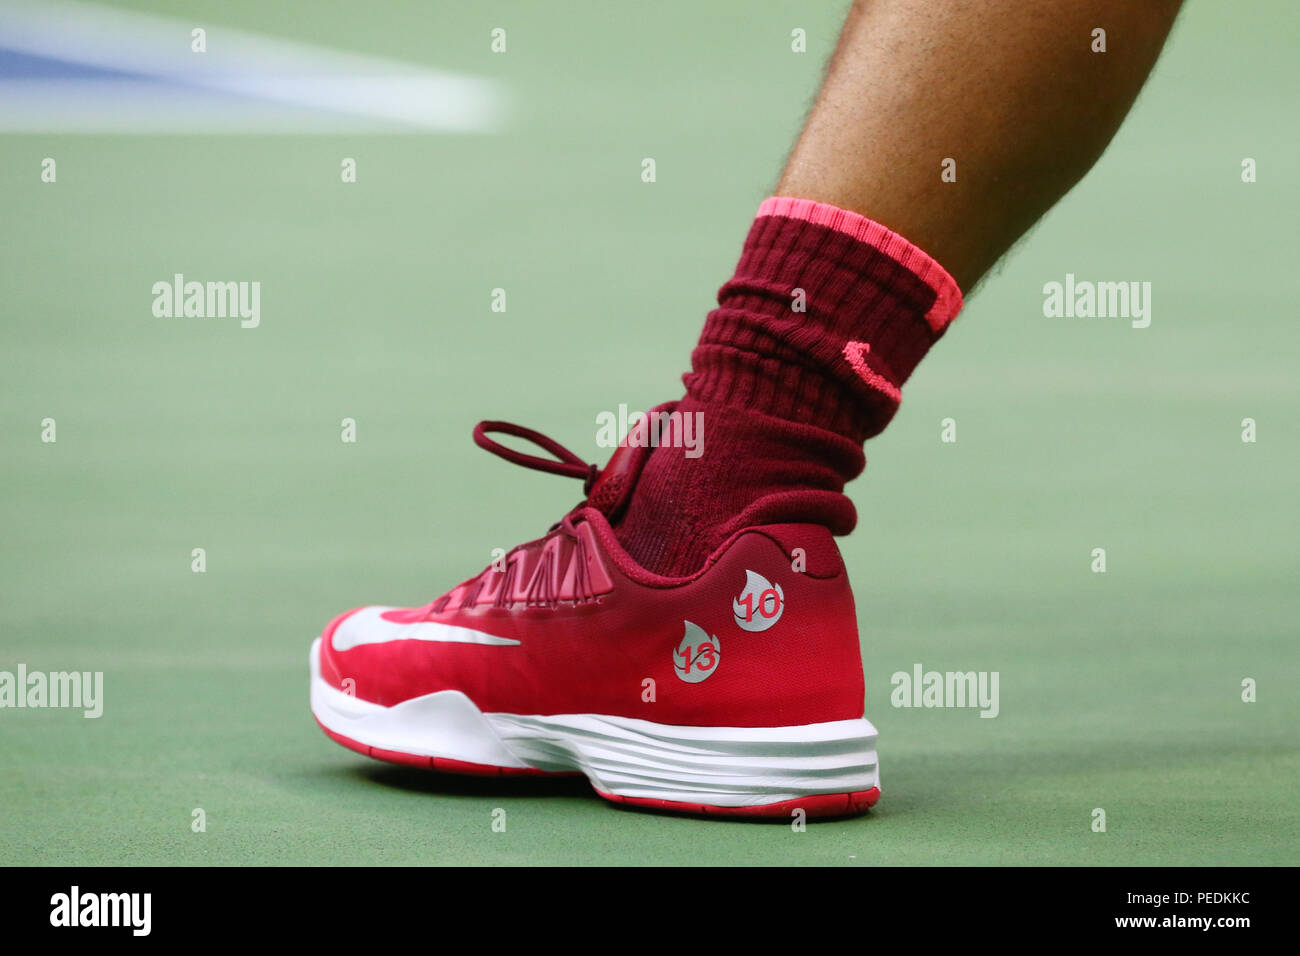 Harbor Have a bath fireworks Grand Slam champion Rafael Nadal of Spain wears custom Nike tennis shoes  during US Open 2017 final match Stock Photo - Alamy